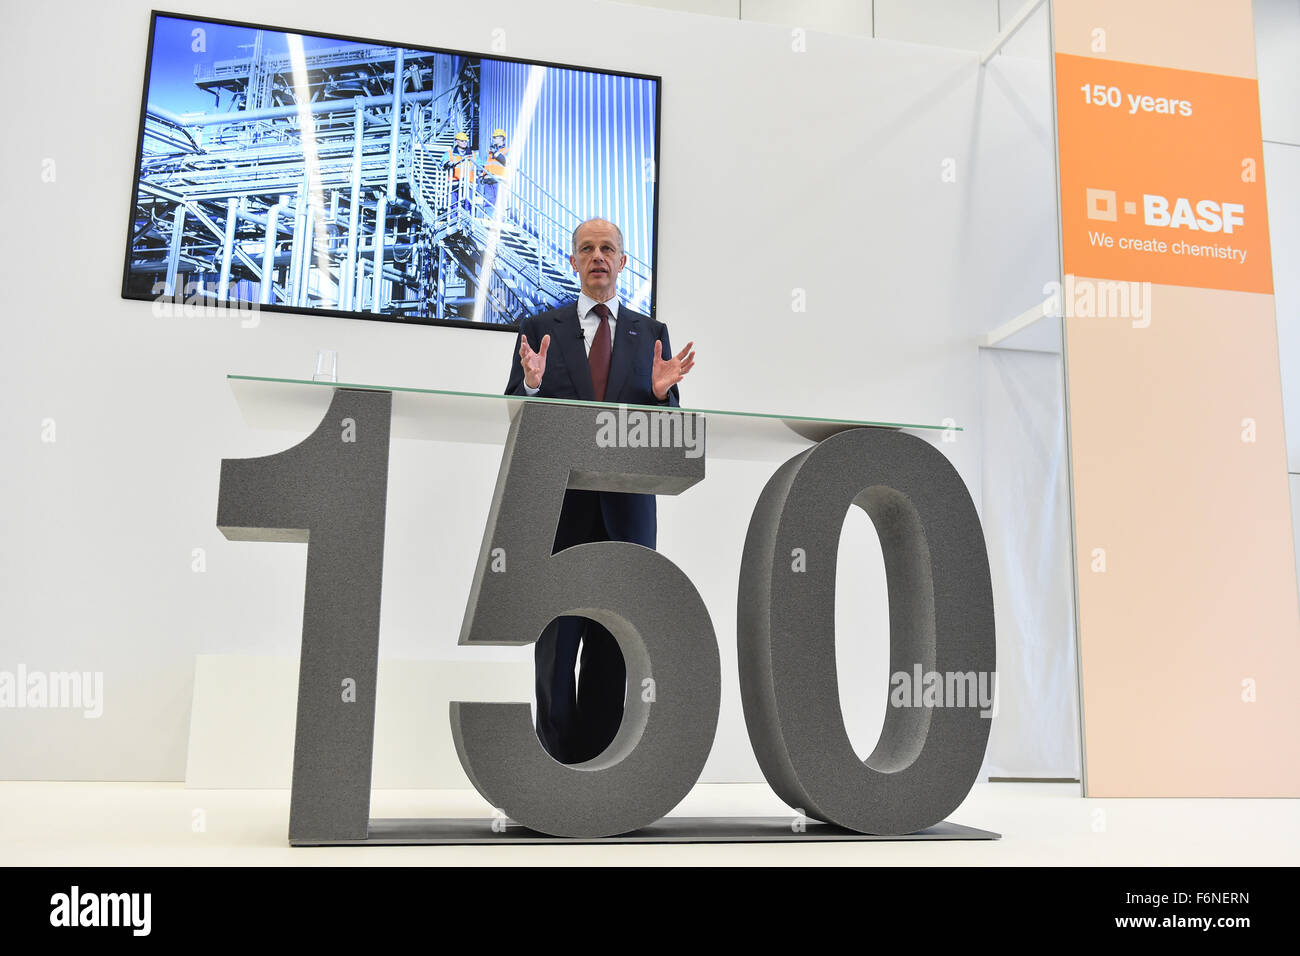 Ludwigshafen, Germany. 17th Nov, 2015. Chairman of the board of chemical company BASF, Kurt Bock, speaks during the inauguration of BASF's new production facility for Toluene diisocyanate (TDI) in Ludwigshafen, Germany, 17 November 2015. Photo: Uwe Anspach/dpa/Alamy Live News Stock Photo